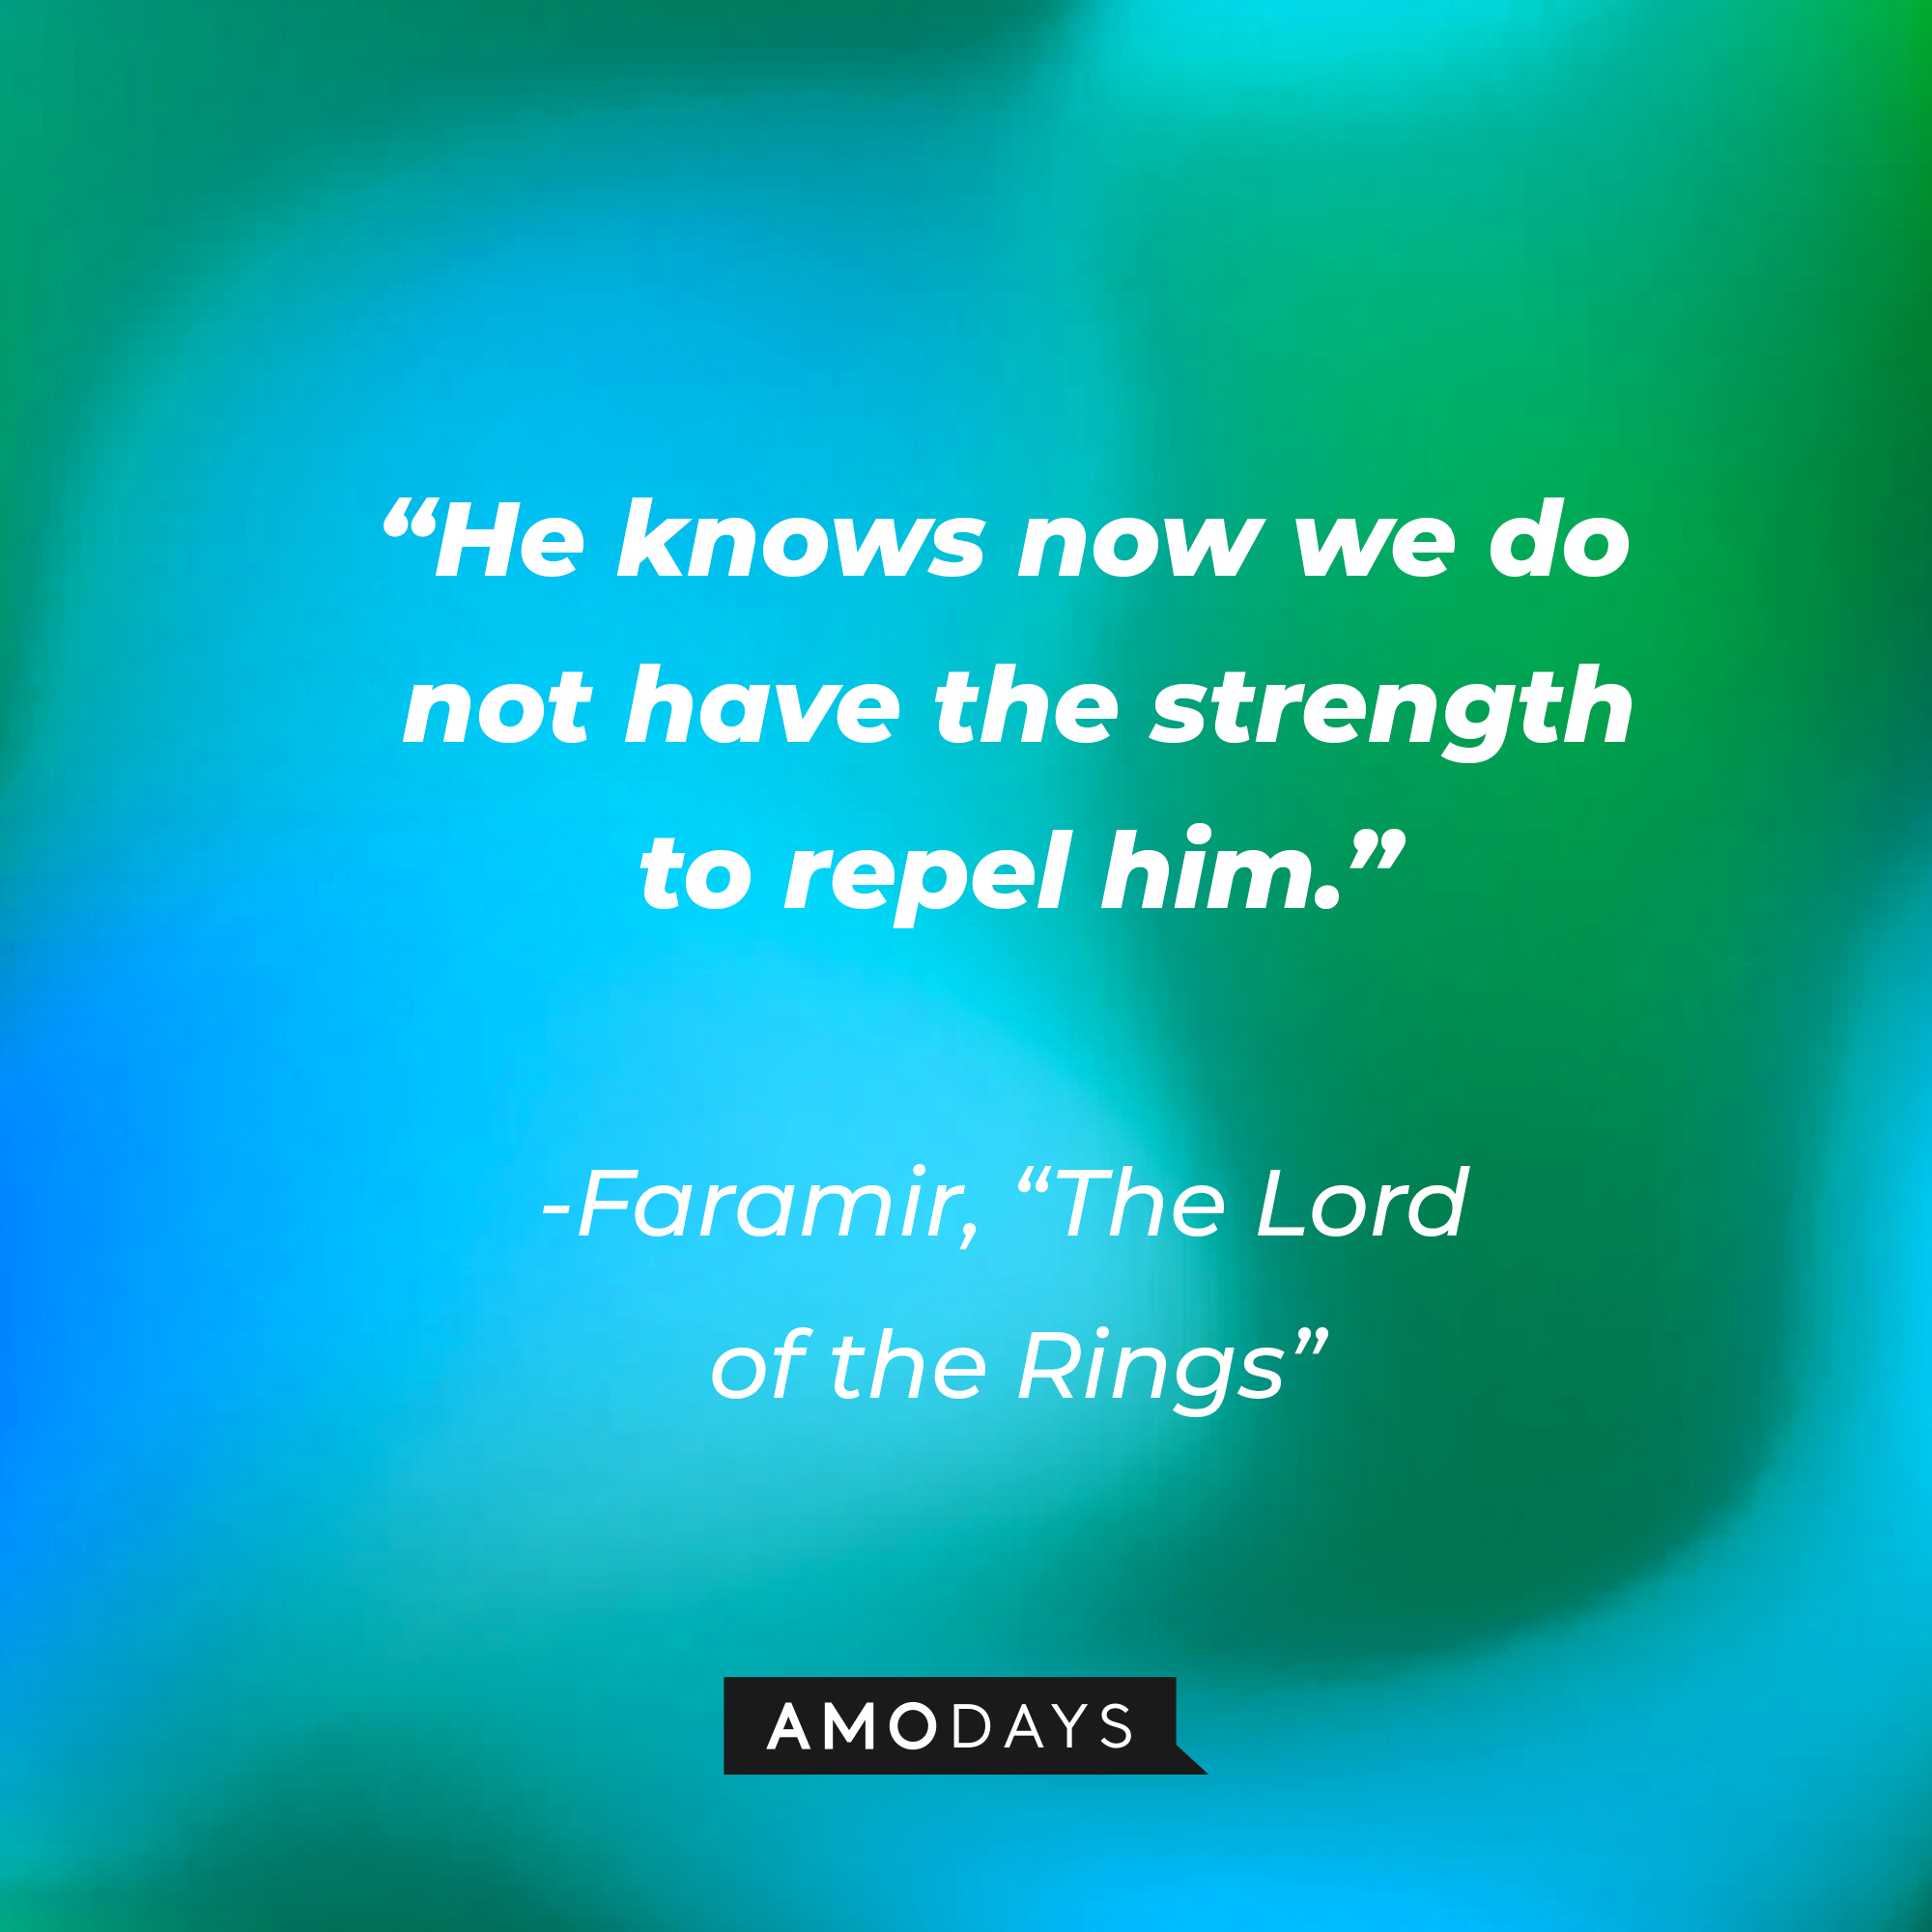 Faramir's quote from "The Lord of the Rings": "He knows now we do not have the strength to repel him." | Source: AmoDays